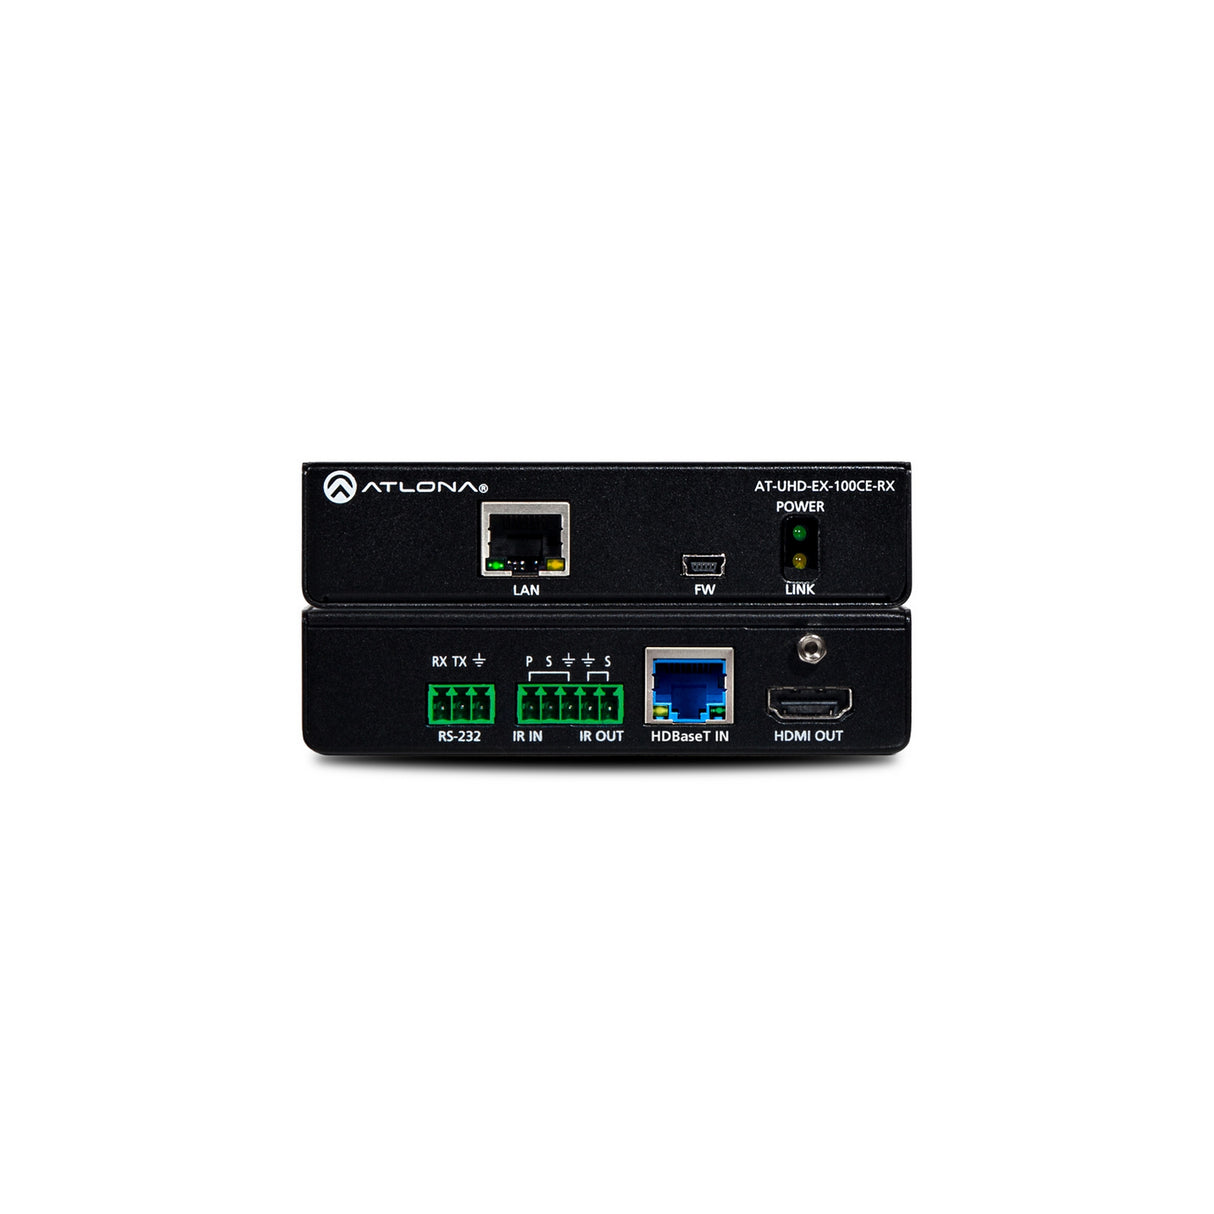 Atlona AT-UHD-EX-100CE-RX 4K/UHD HDMI Over HDBaseT Receiver with Ethernet